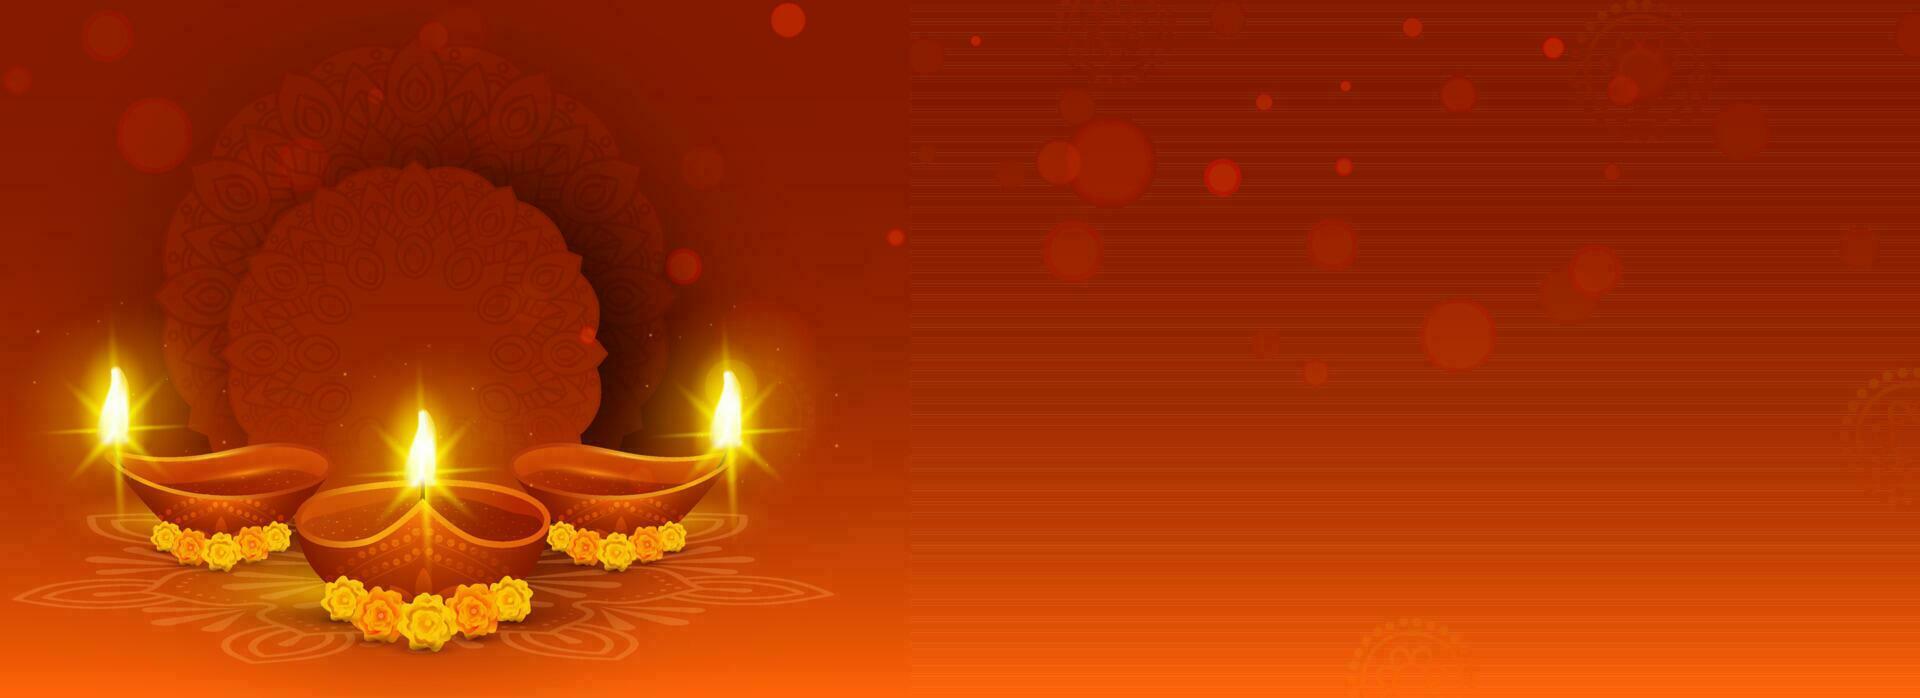 Realistic Burning Oil Lamps With Marigold Flowers, Empty Frame On Burnt Red And Orange Bokeh Blur Background. Happy Diwali Header or Banner Concept. vector